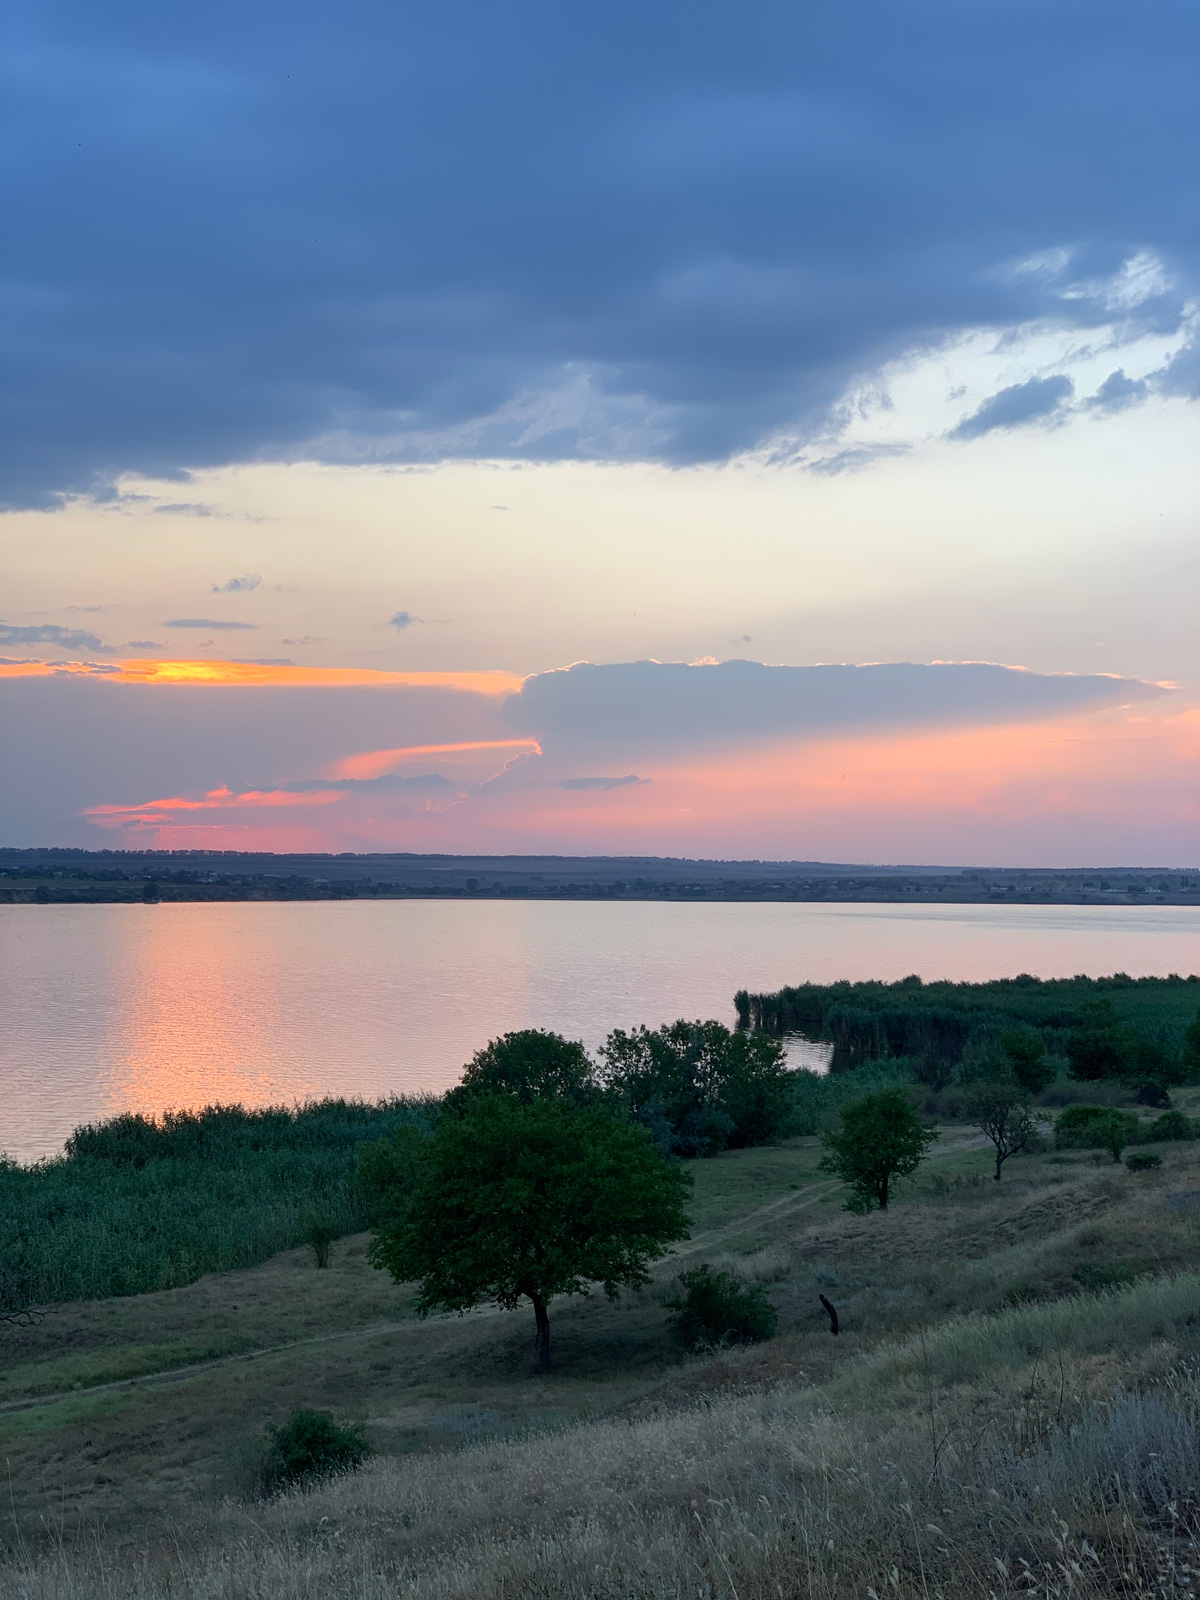 Summer evening in Bessarabia - sunset over the river